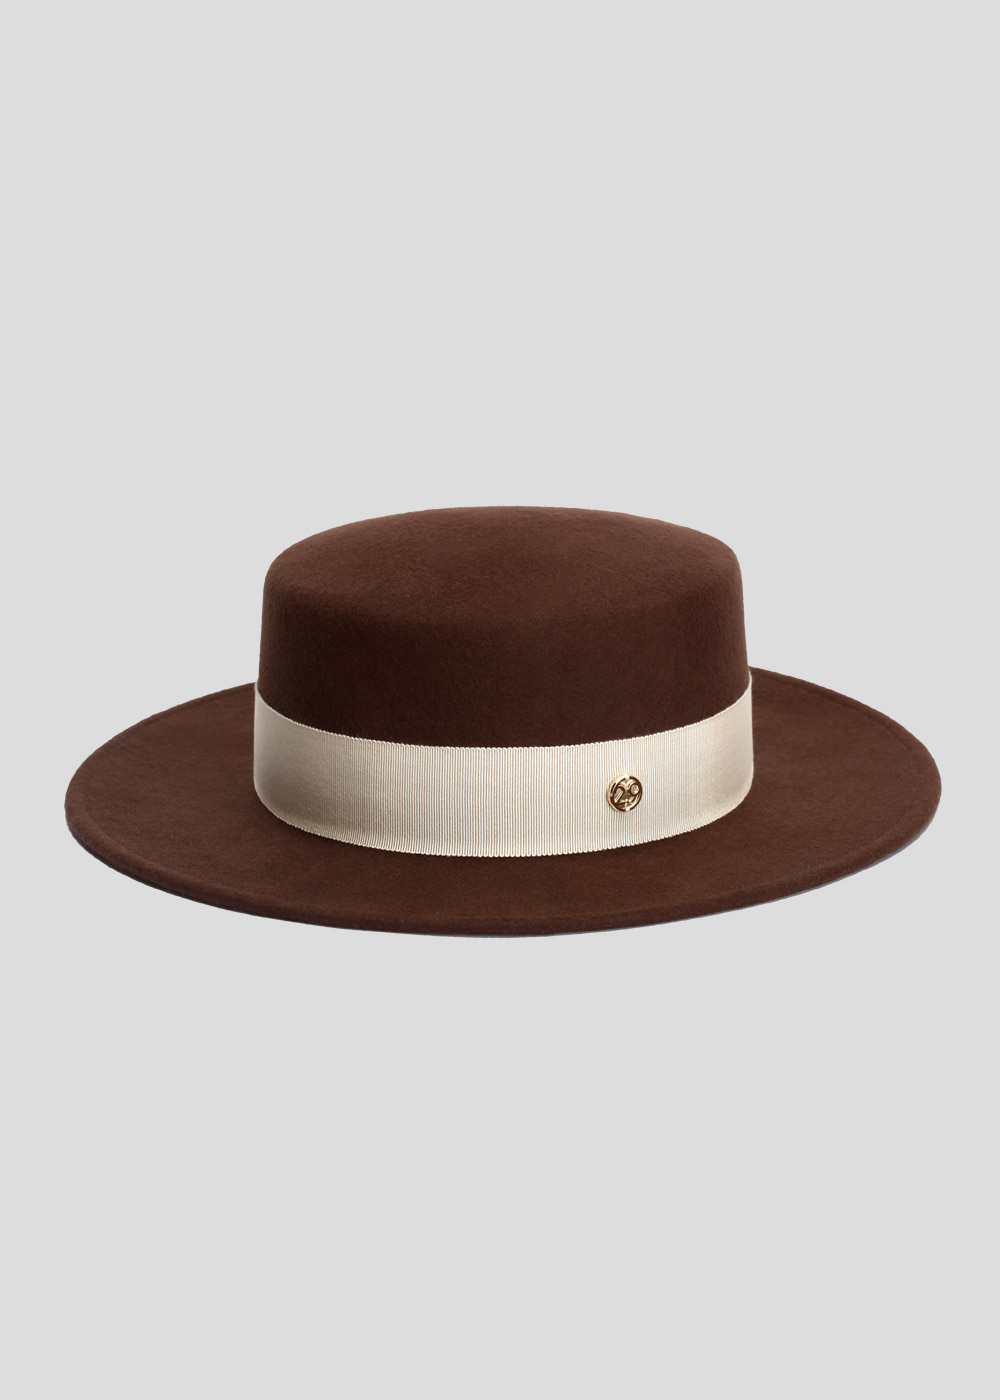 [sold out] classic boater dark brown/ ivory